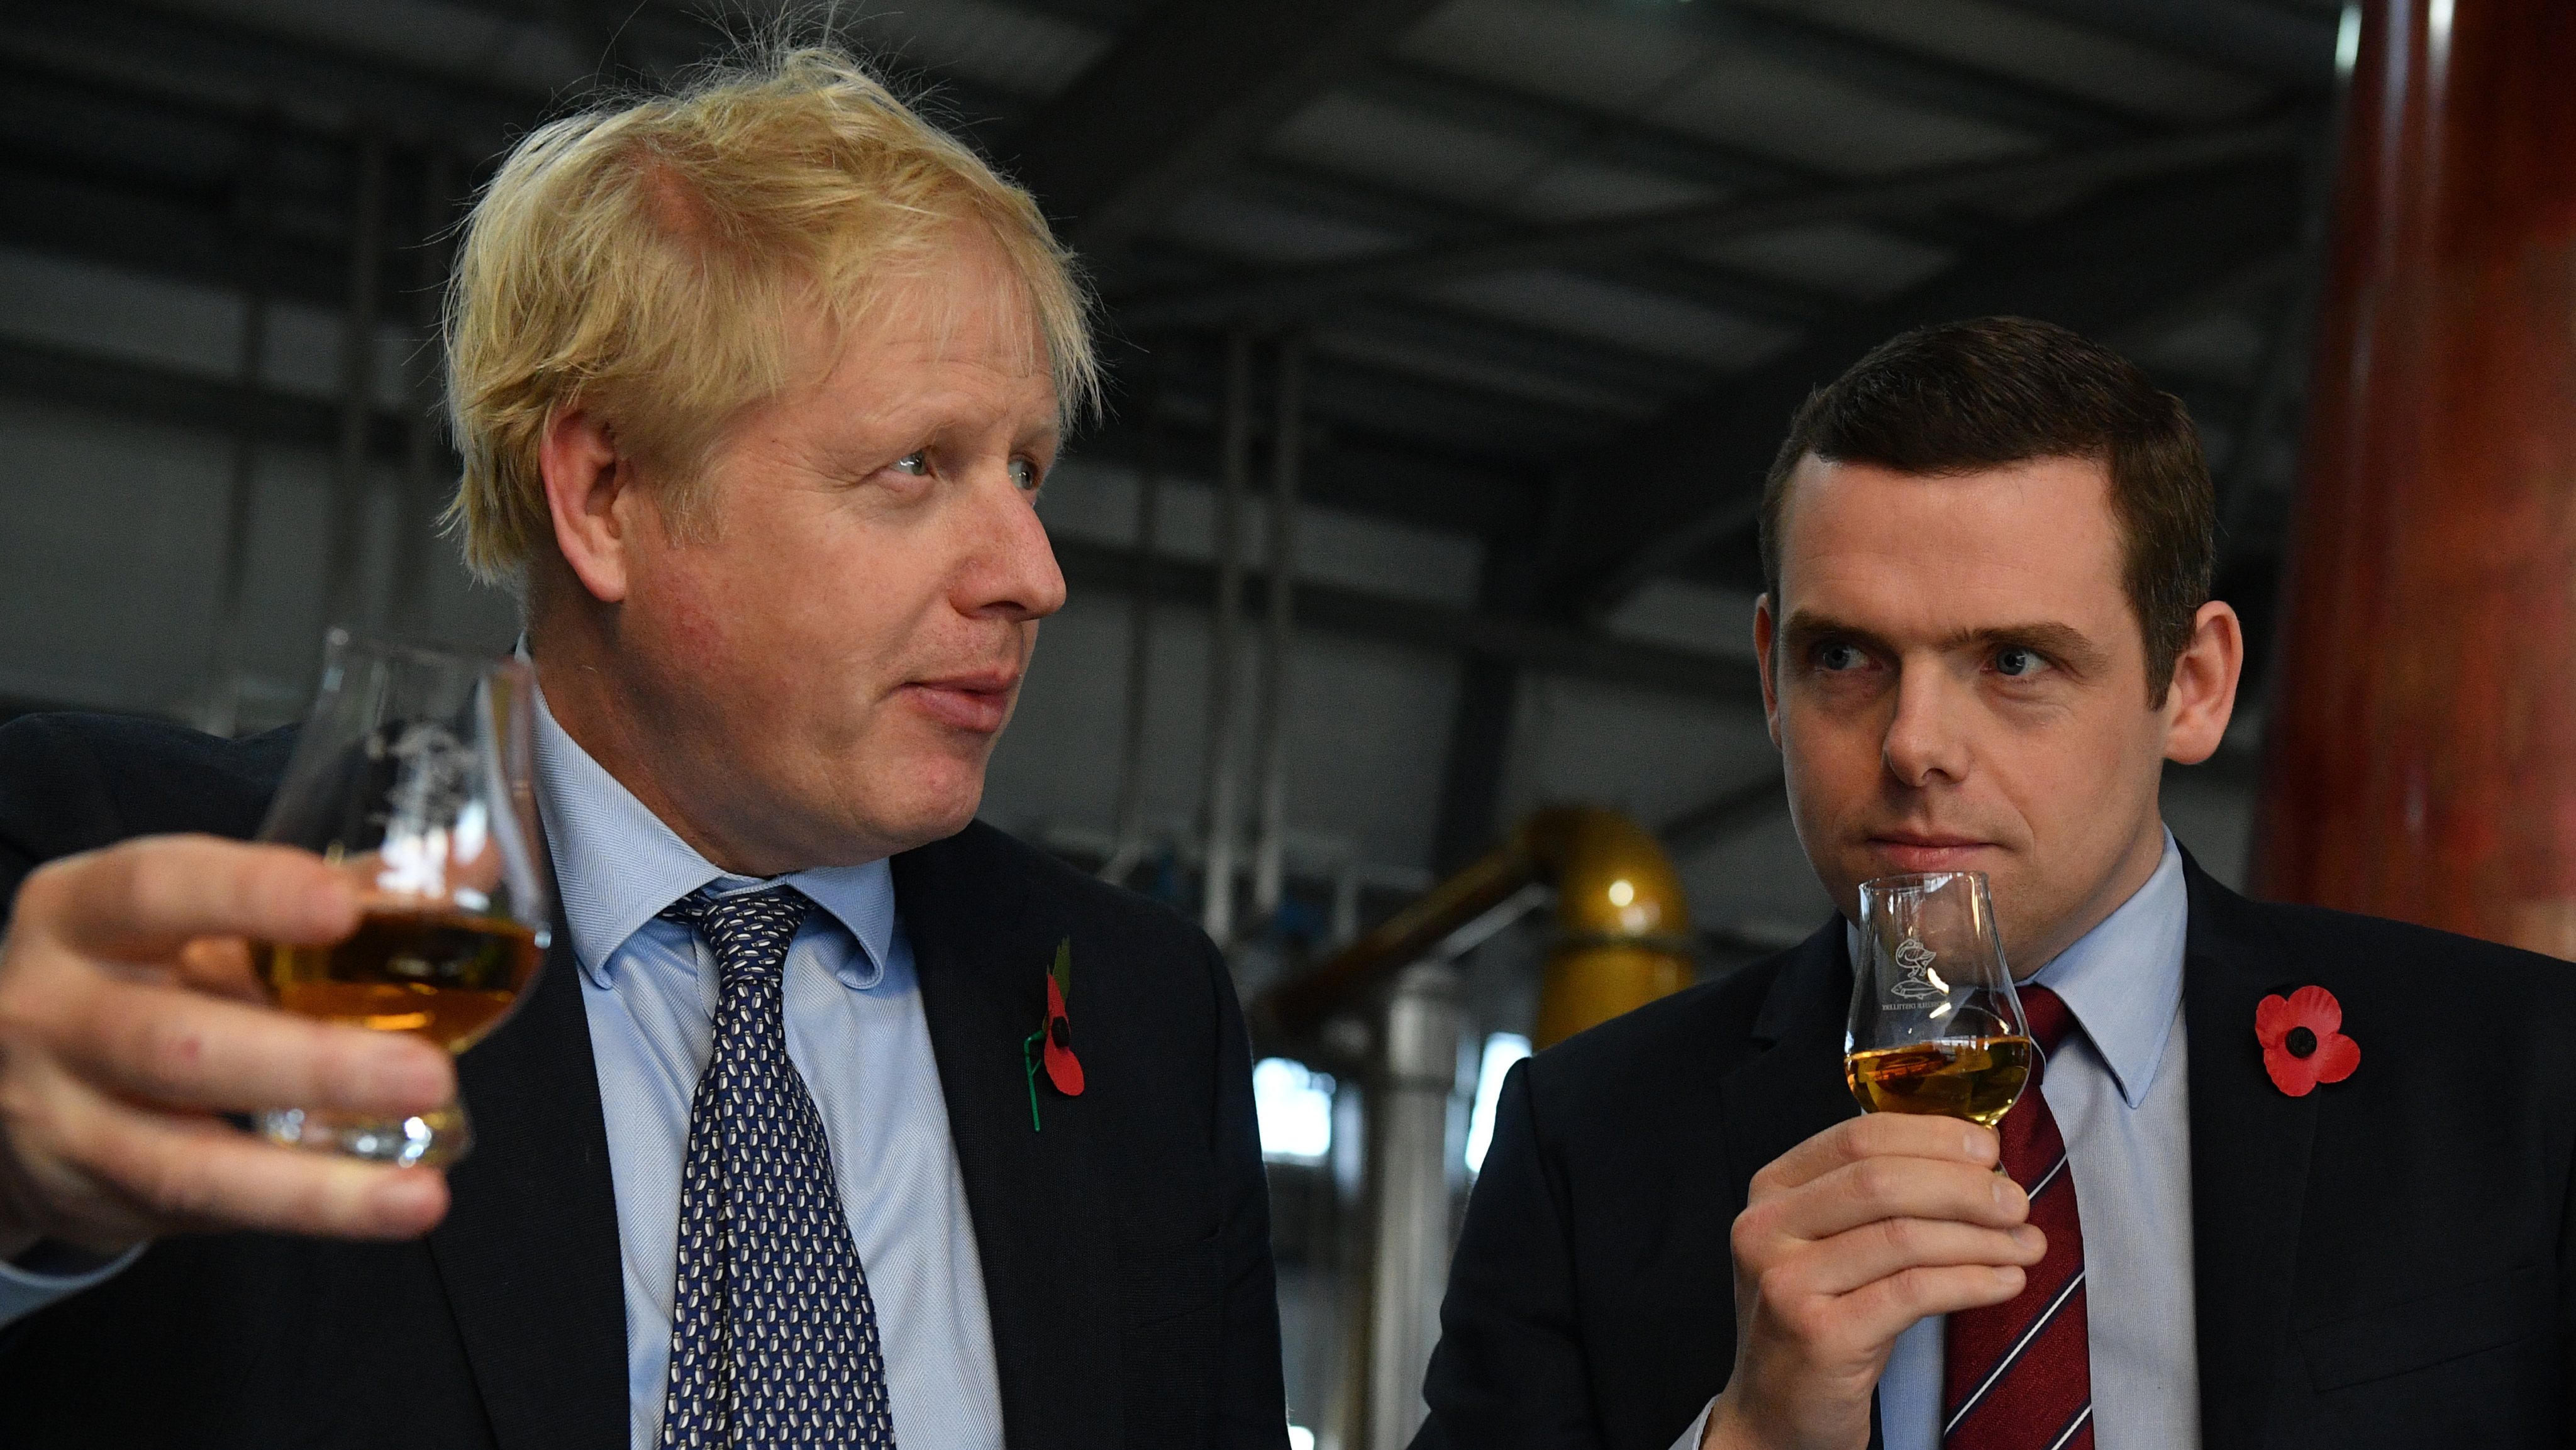 Day One - Boris Johnson On The General Election Campaign Trail